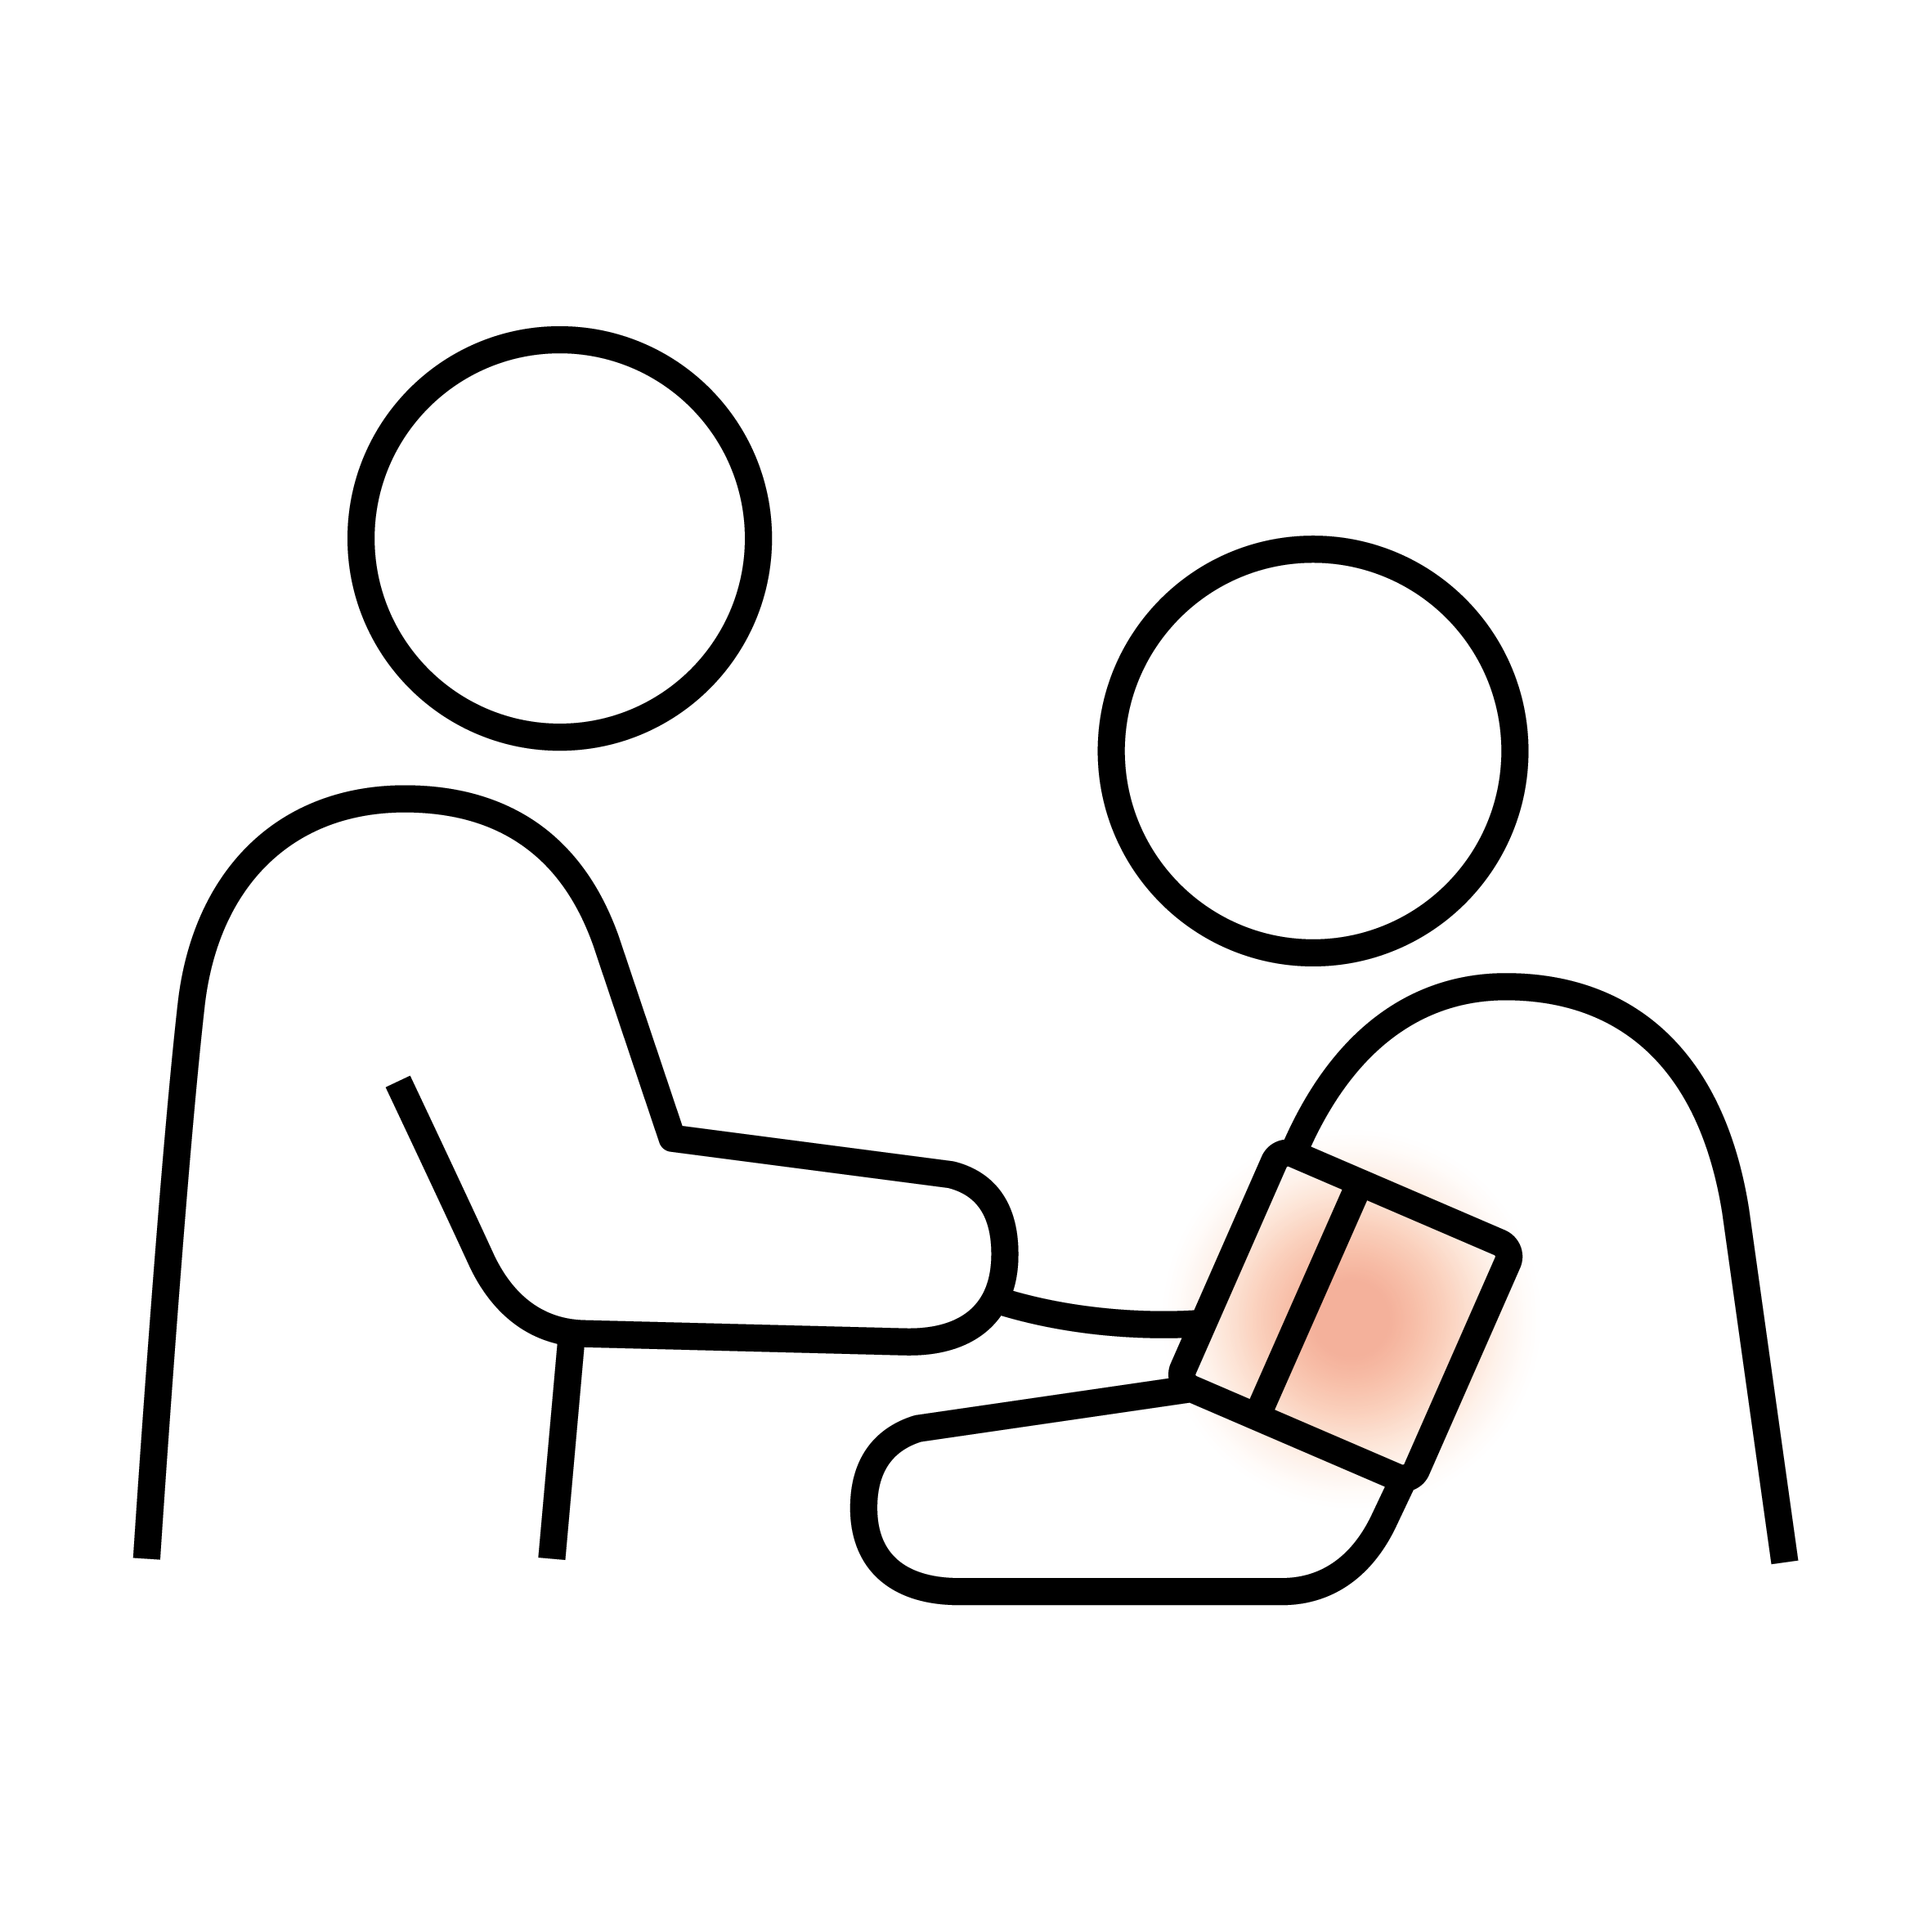 Vector graphic of a medical examination in which a doctor applies a medical instrument to a patient's knee.